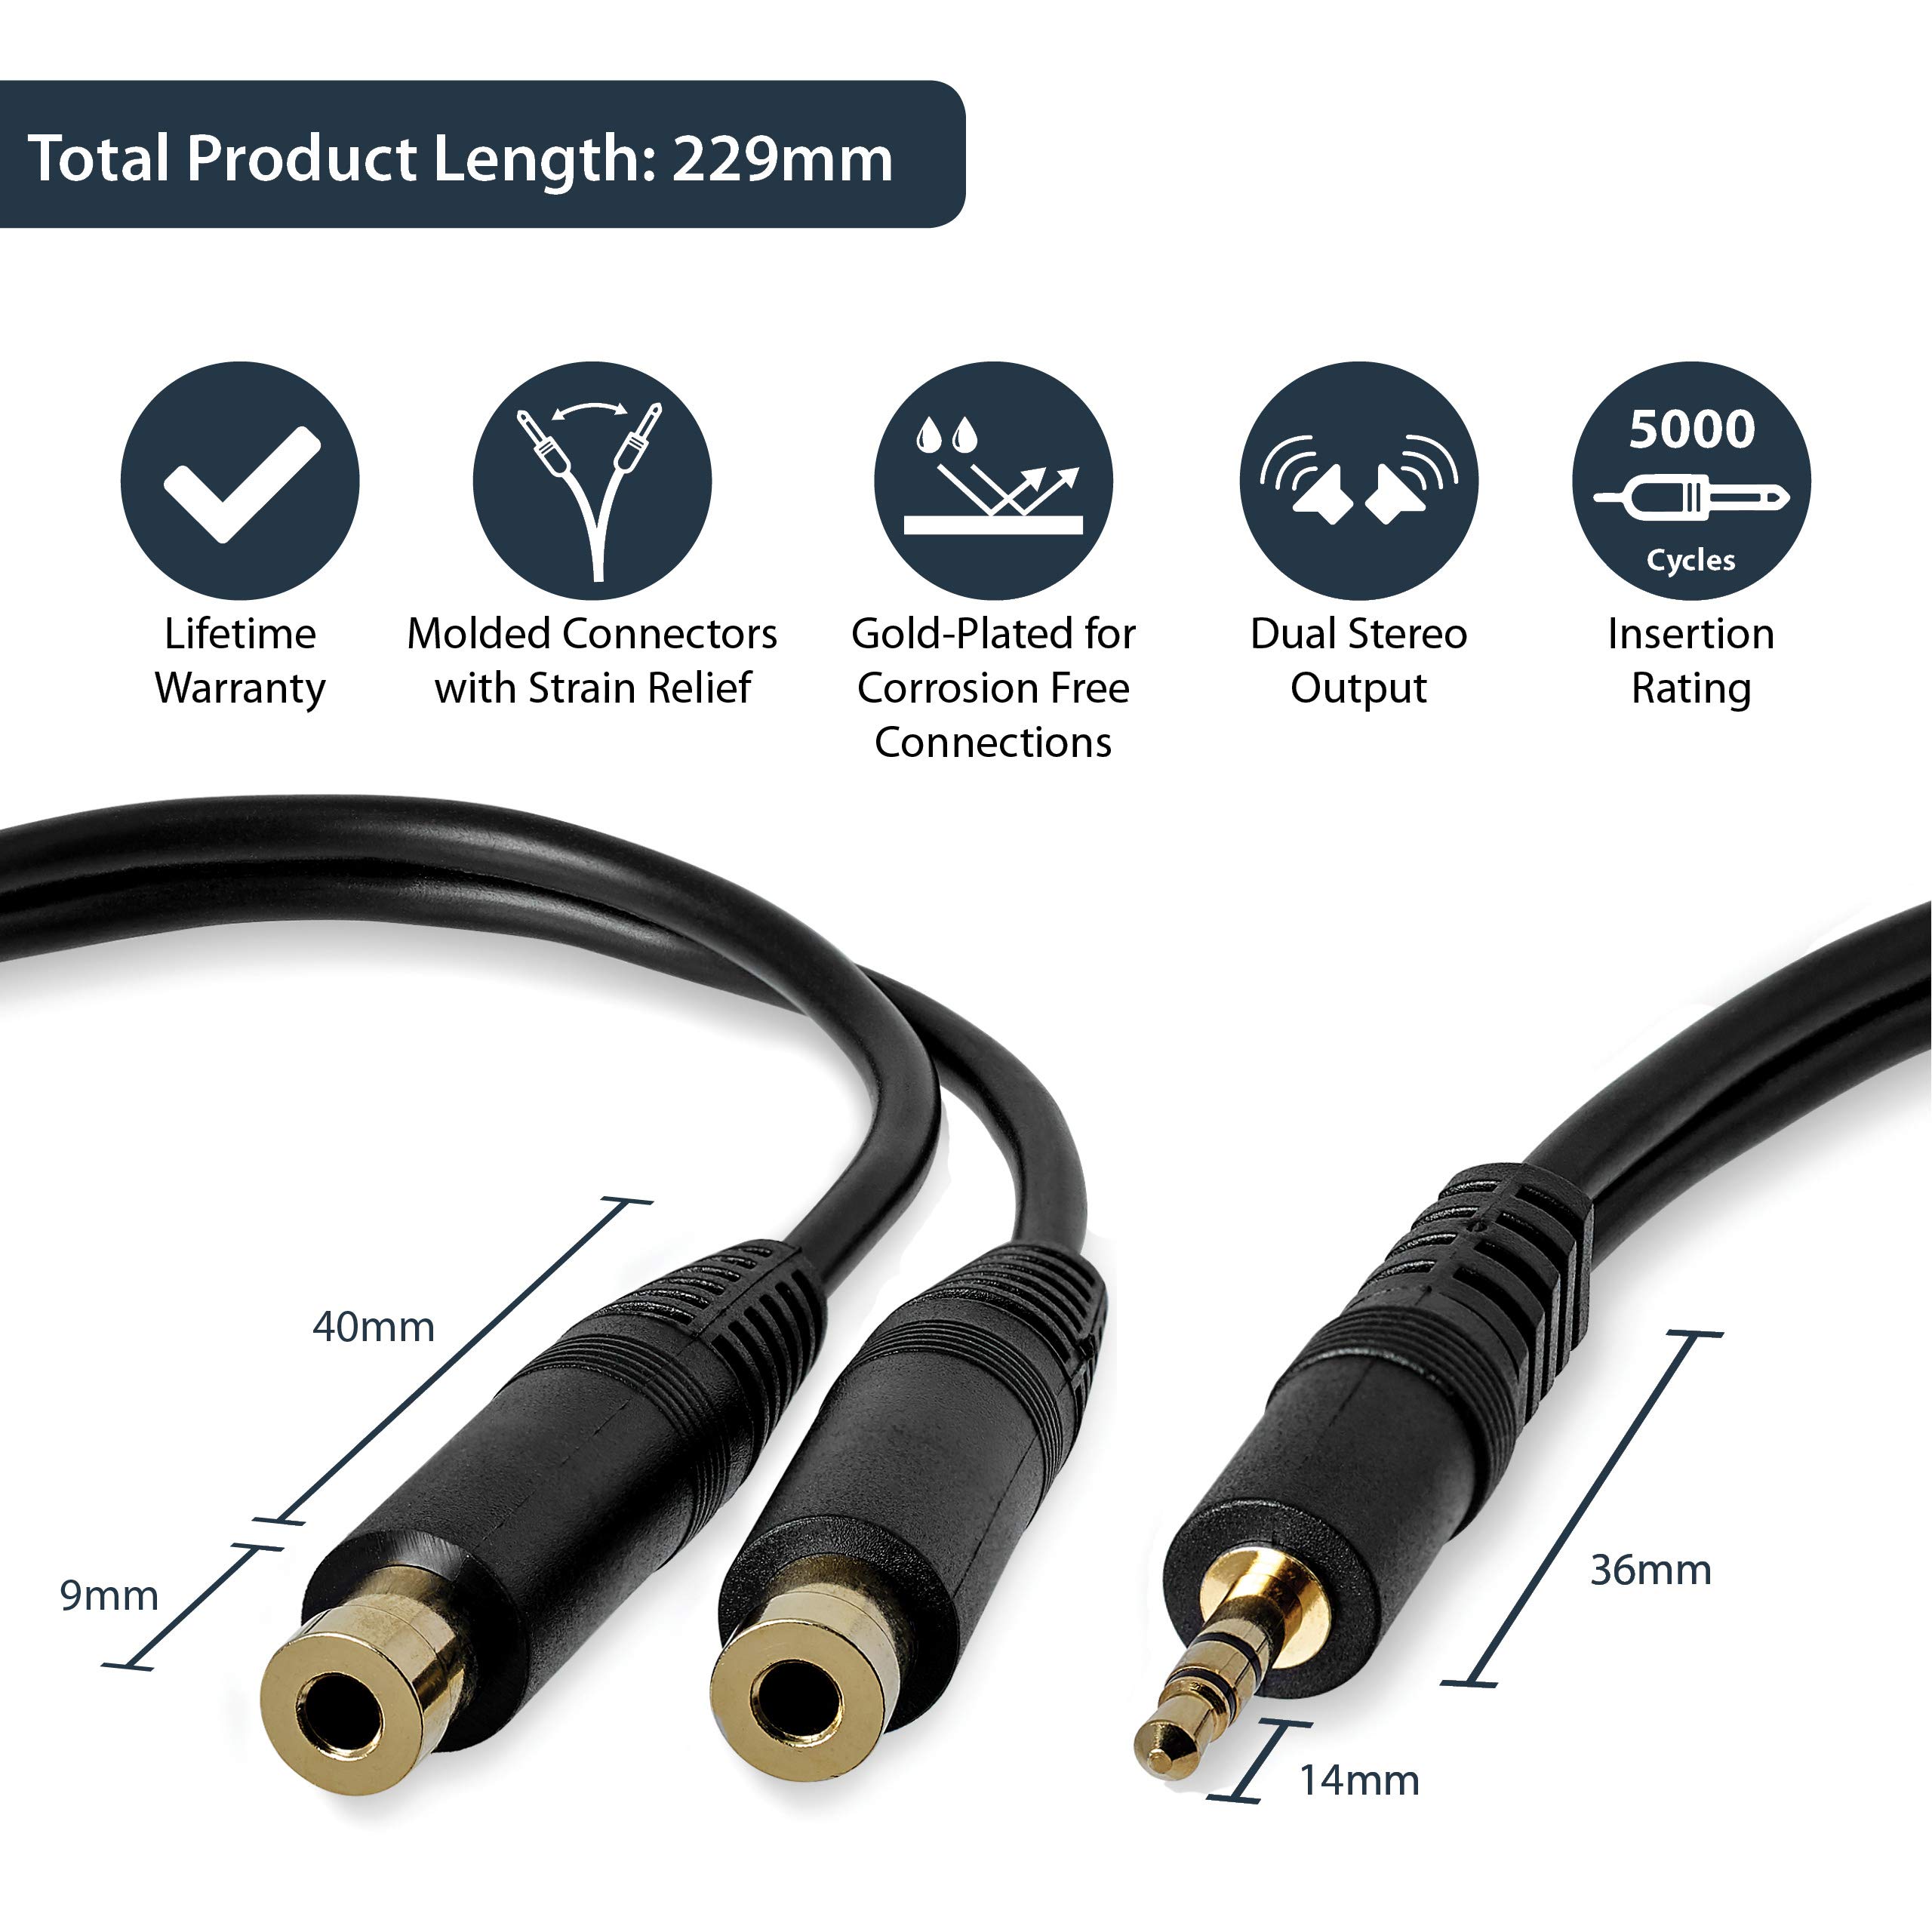 StarTech.com 6 in. 3.5mm Audio Splitter Cable - Stereo Splitter Cable - Gold Terminals - 3.5mm Male to 2x 3.5mm Female - Headphone Splitter (MUY1MFF),Black